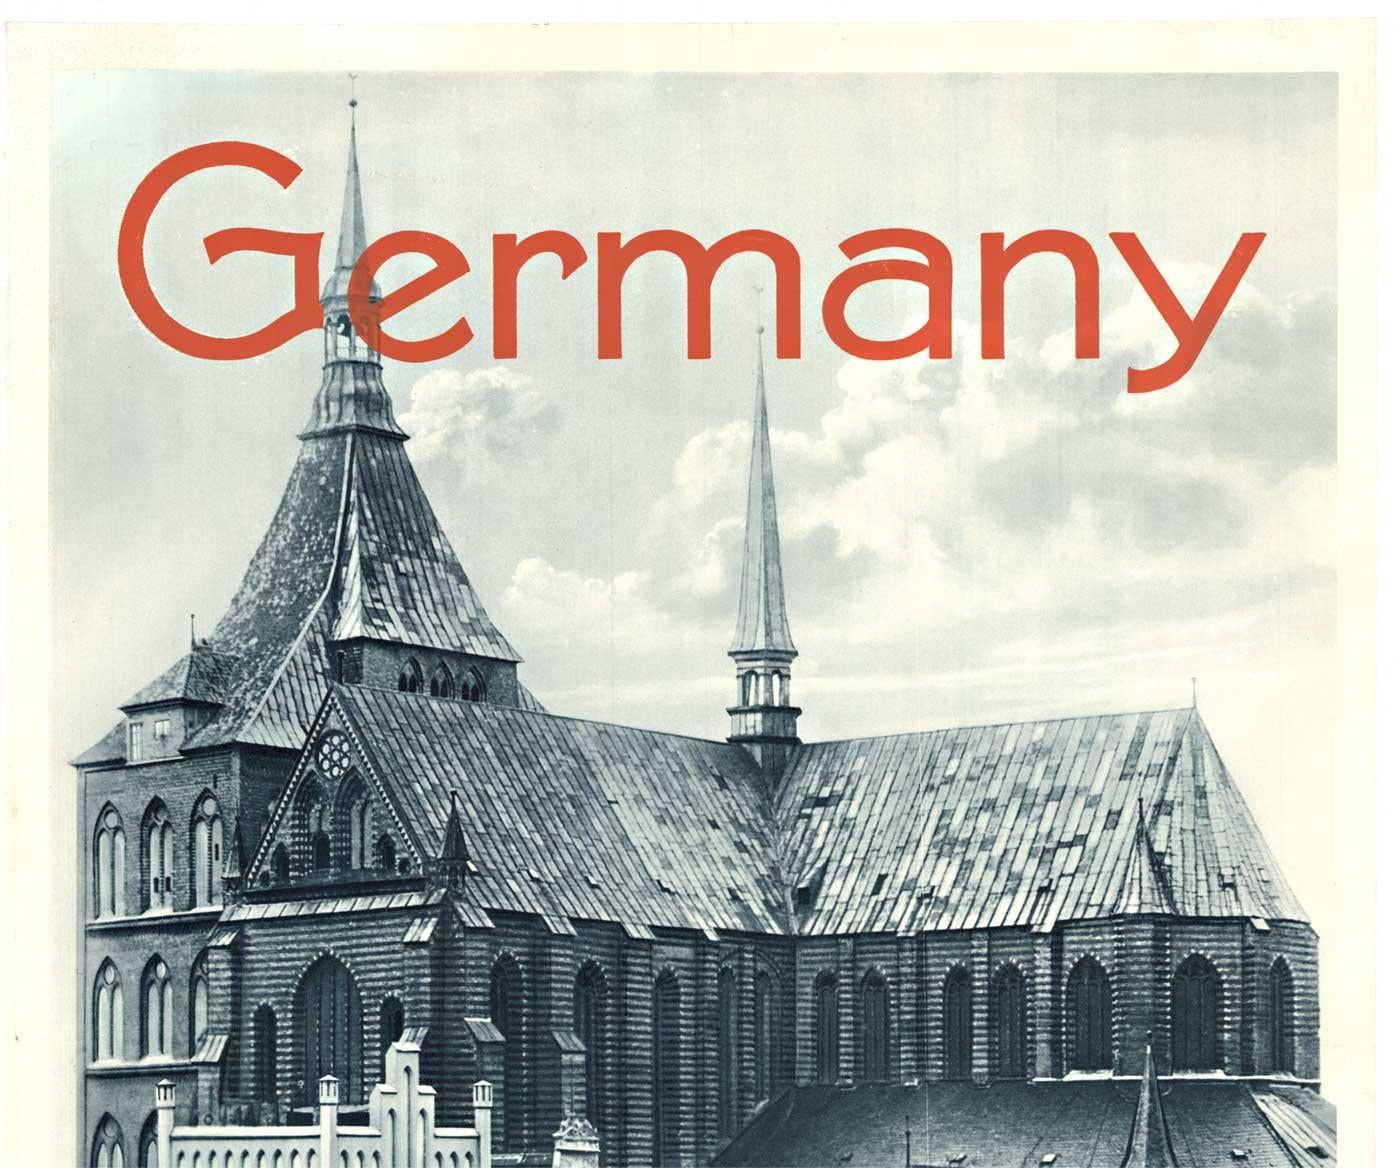 Original Germany, St Mary's Church in Rostock vintage poster, 1930s - Print by Unknown